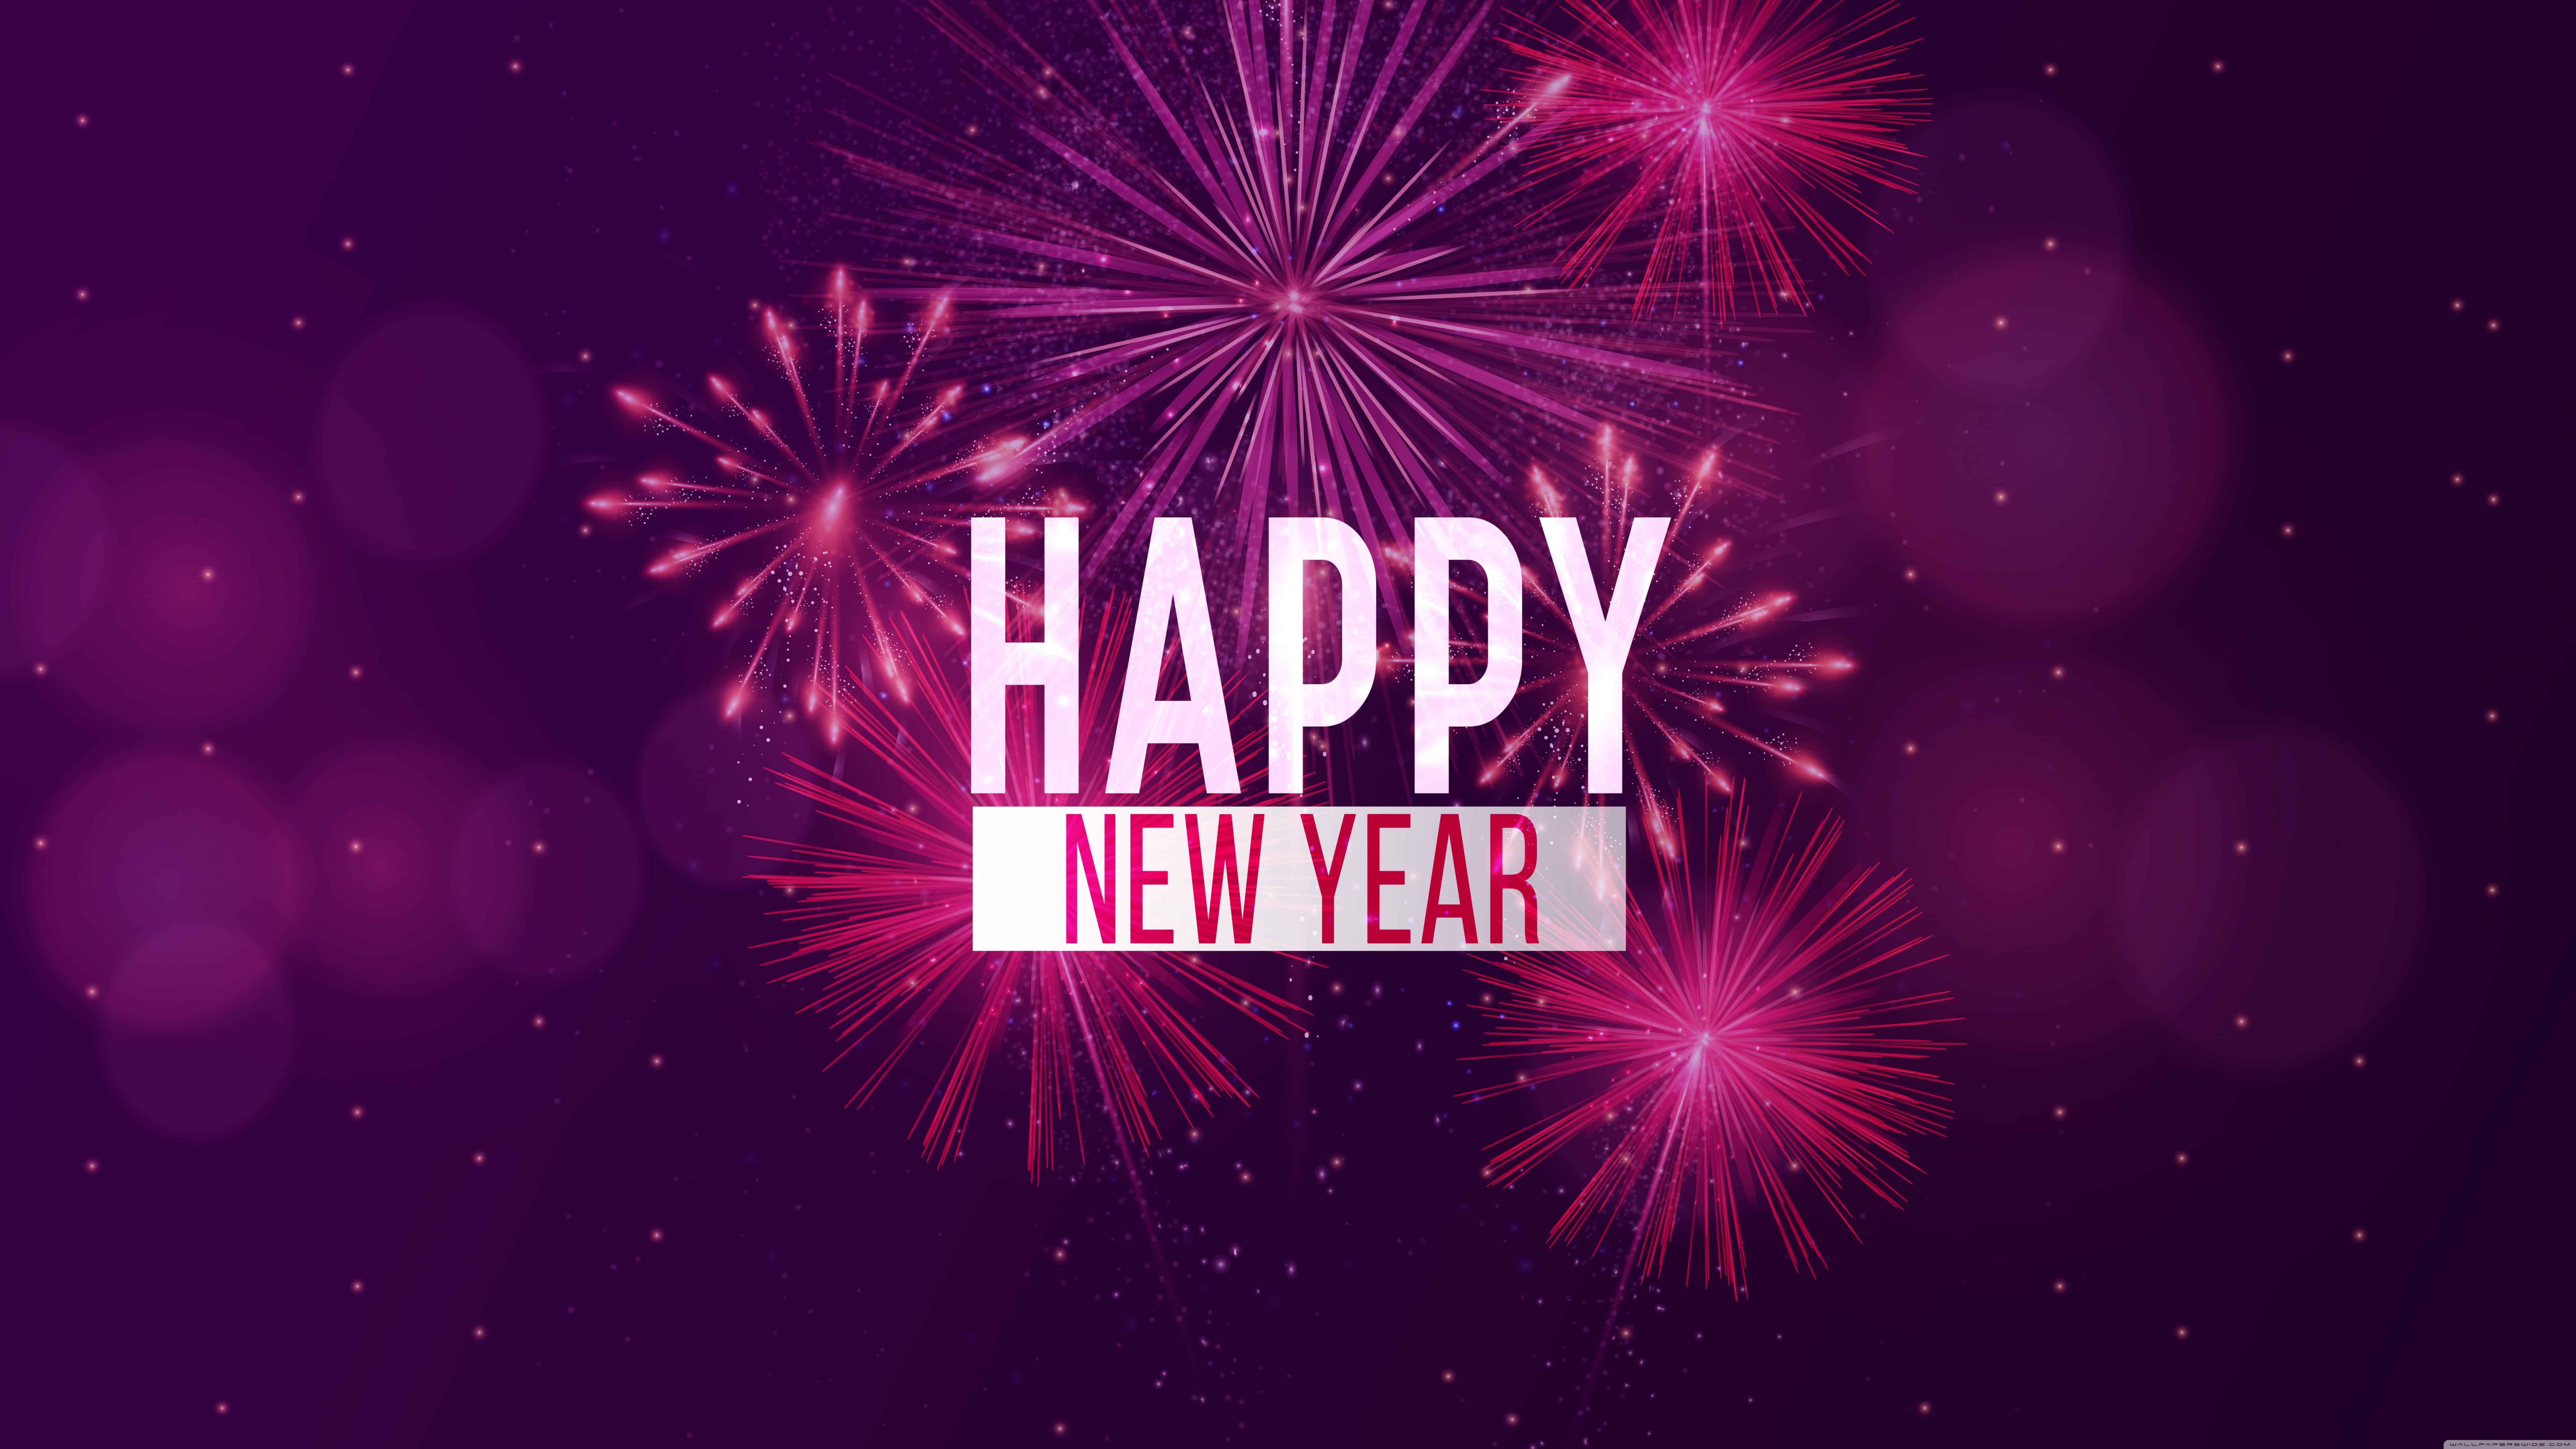 Purple Happy New Year Wallpapers - Wallpaper Cave